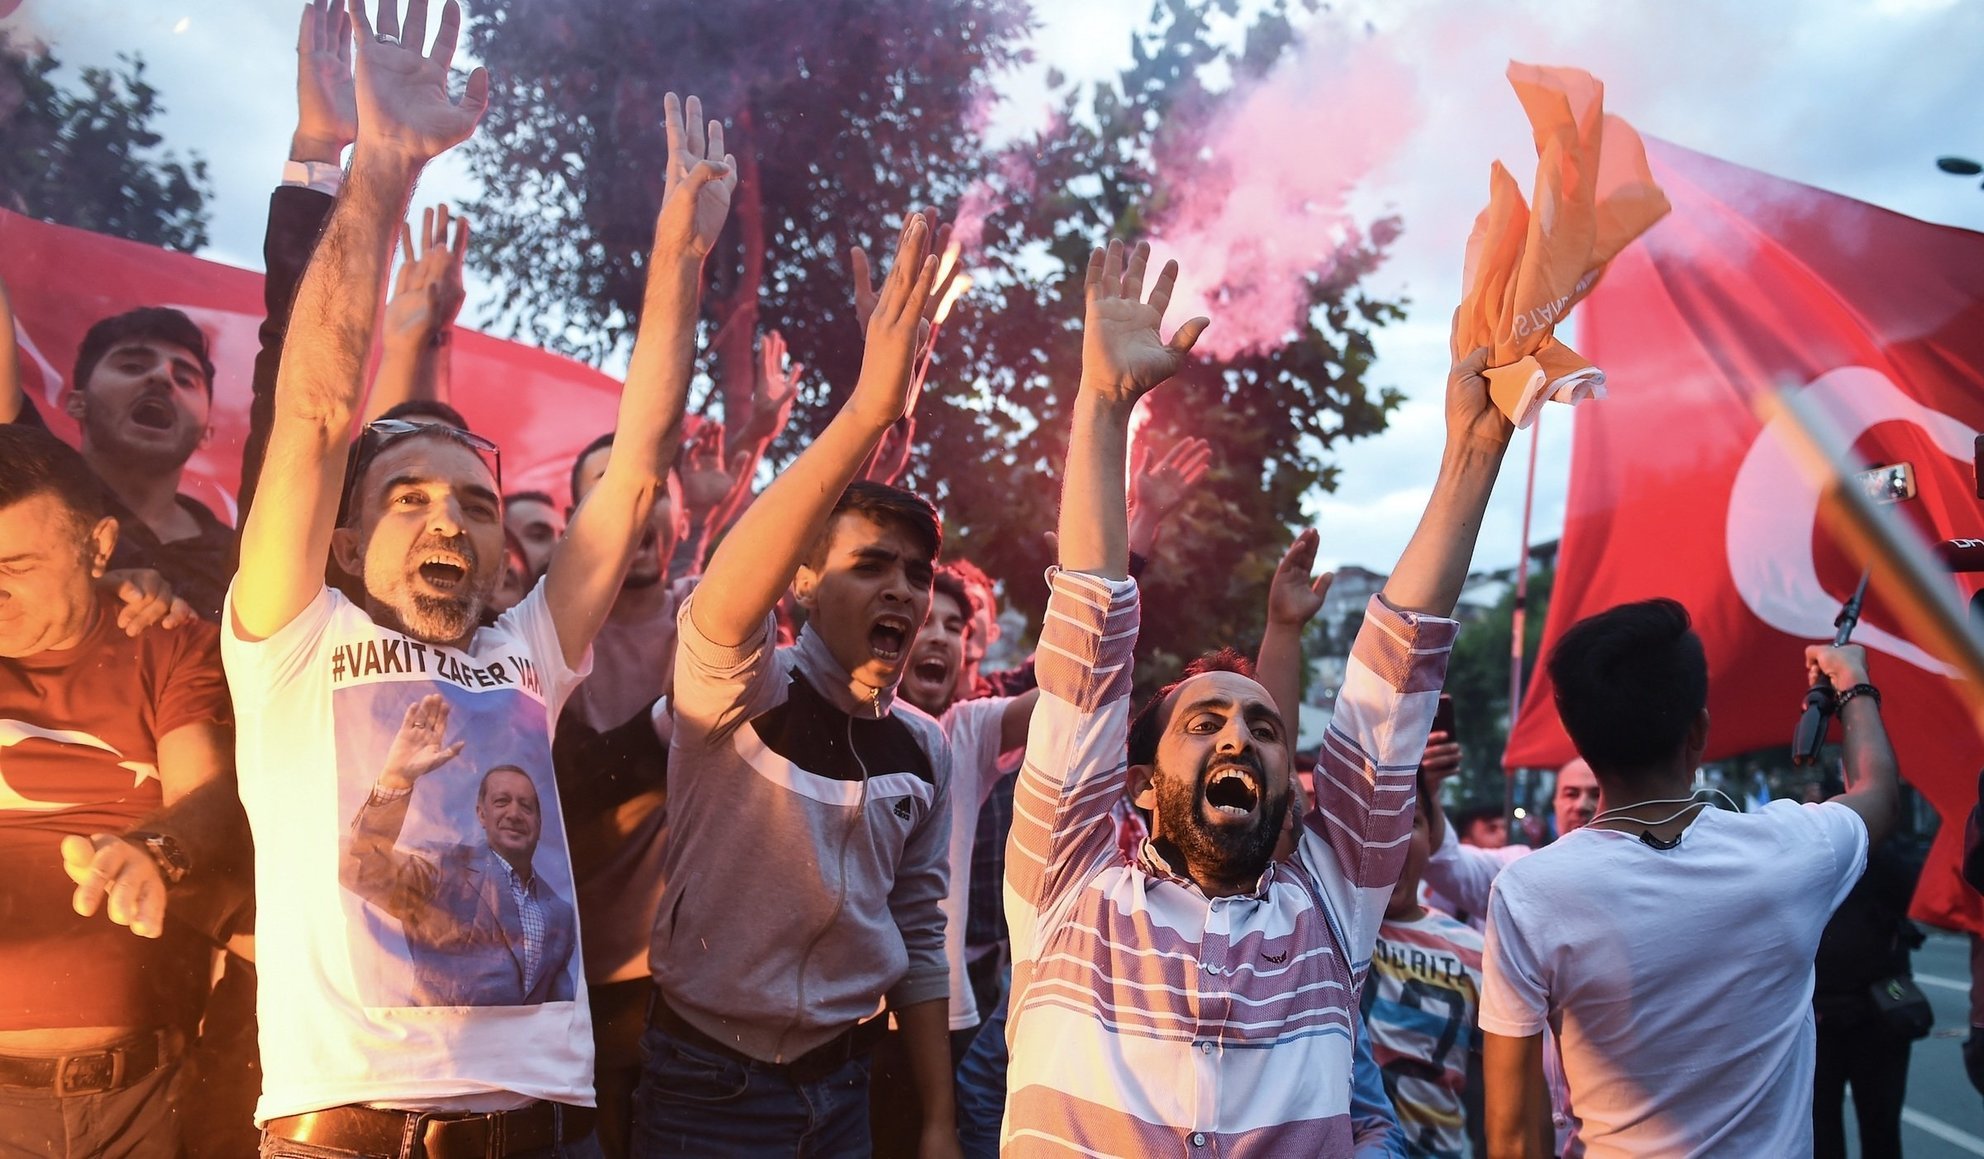 Erdoğan’s supporters celebrate outside AK party headquarters on June 24 in Istanbul, Turkey (photo credit: Jeff J. Mitchell/Getty Images)